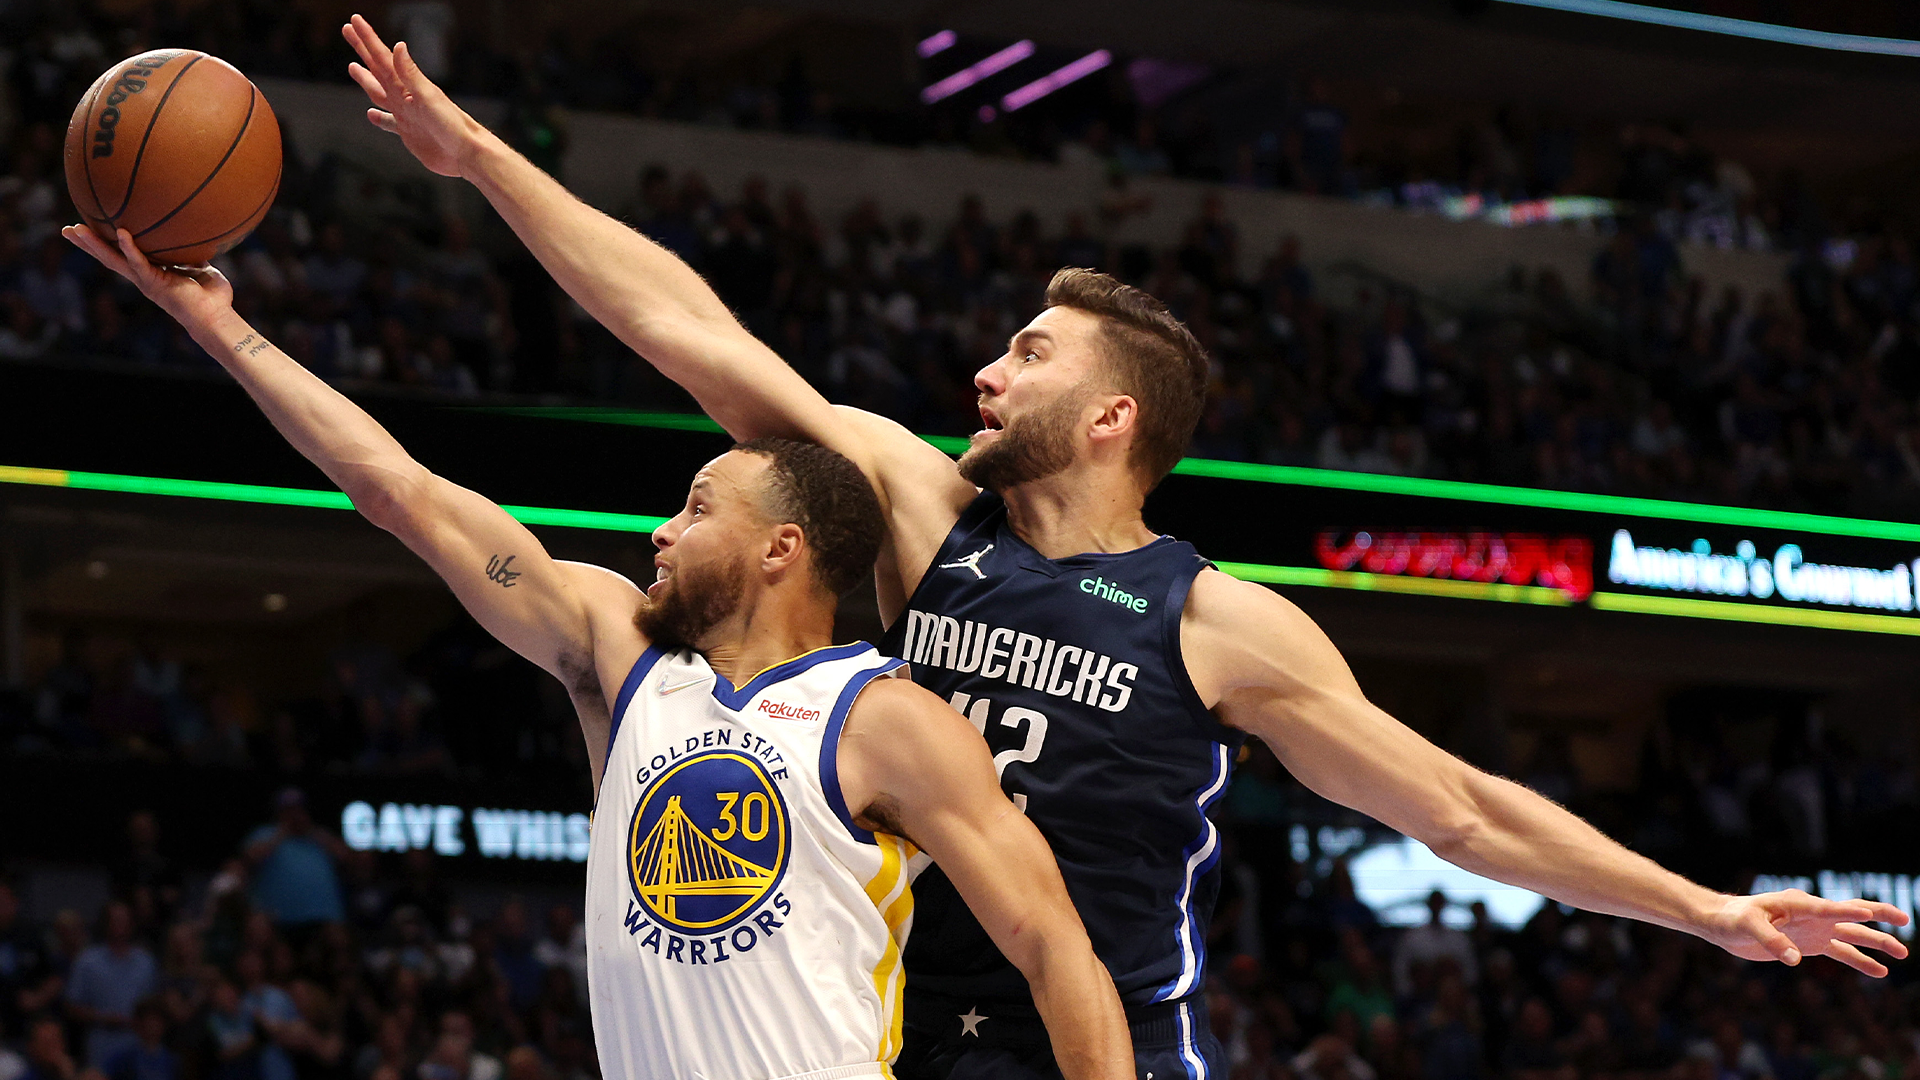 Luka Doncic leads Dallas Mavericks to victory against Golden State Warriors  to avoid WCF sweep